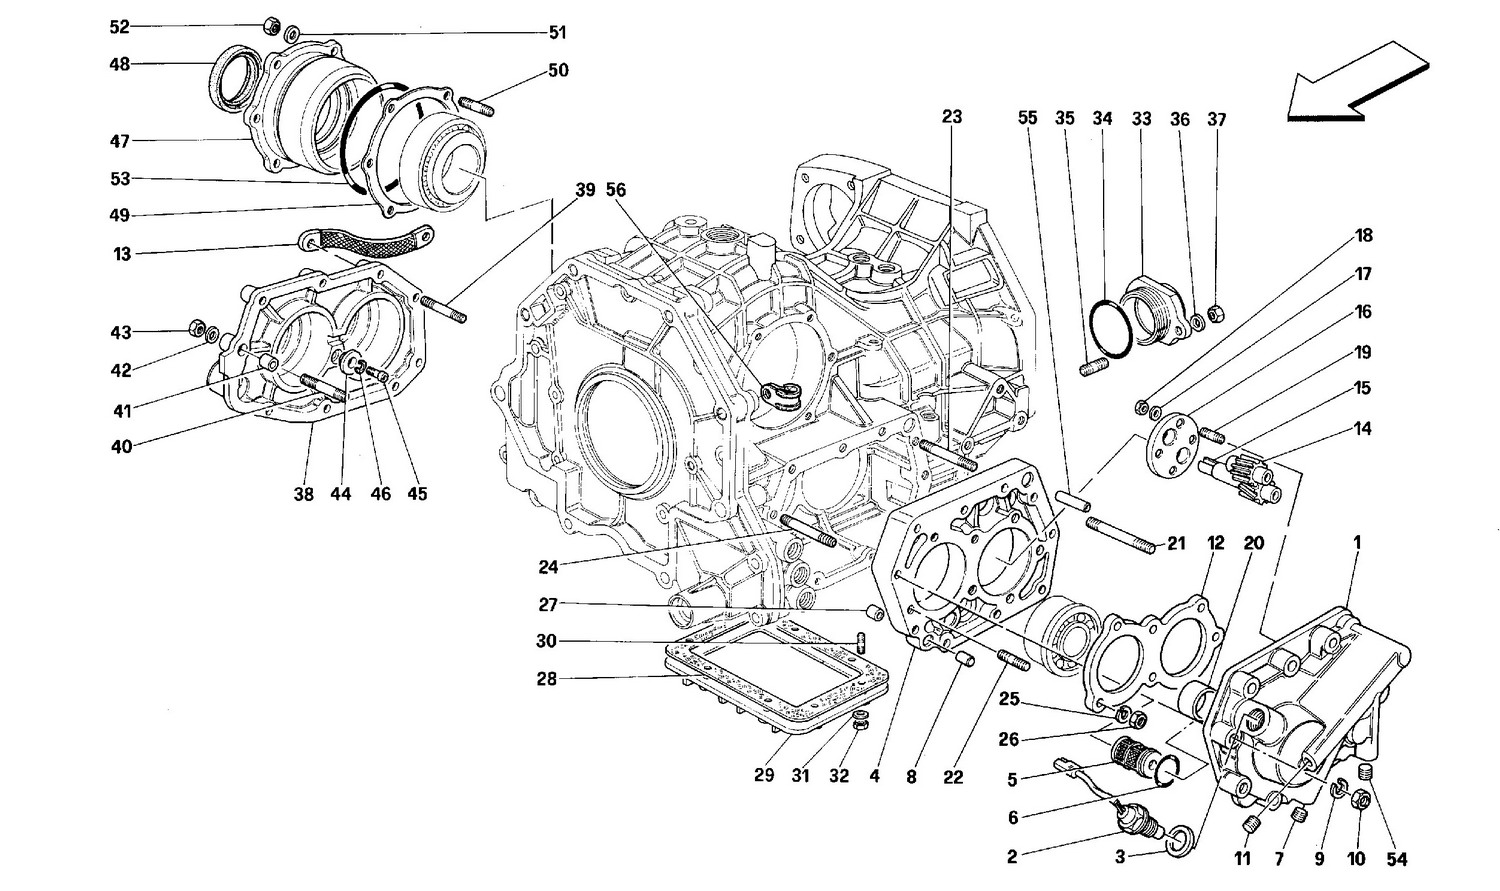 Schematic: Gearbox Covers -Valid For Cars With 4P